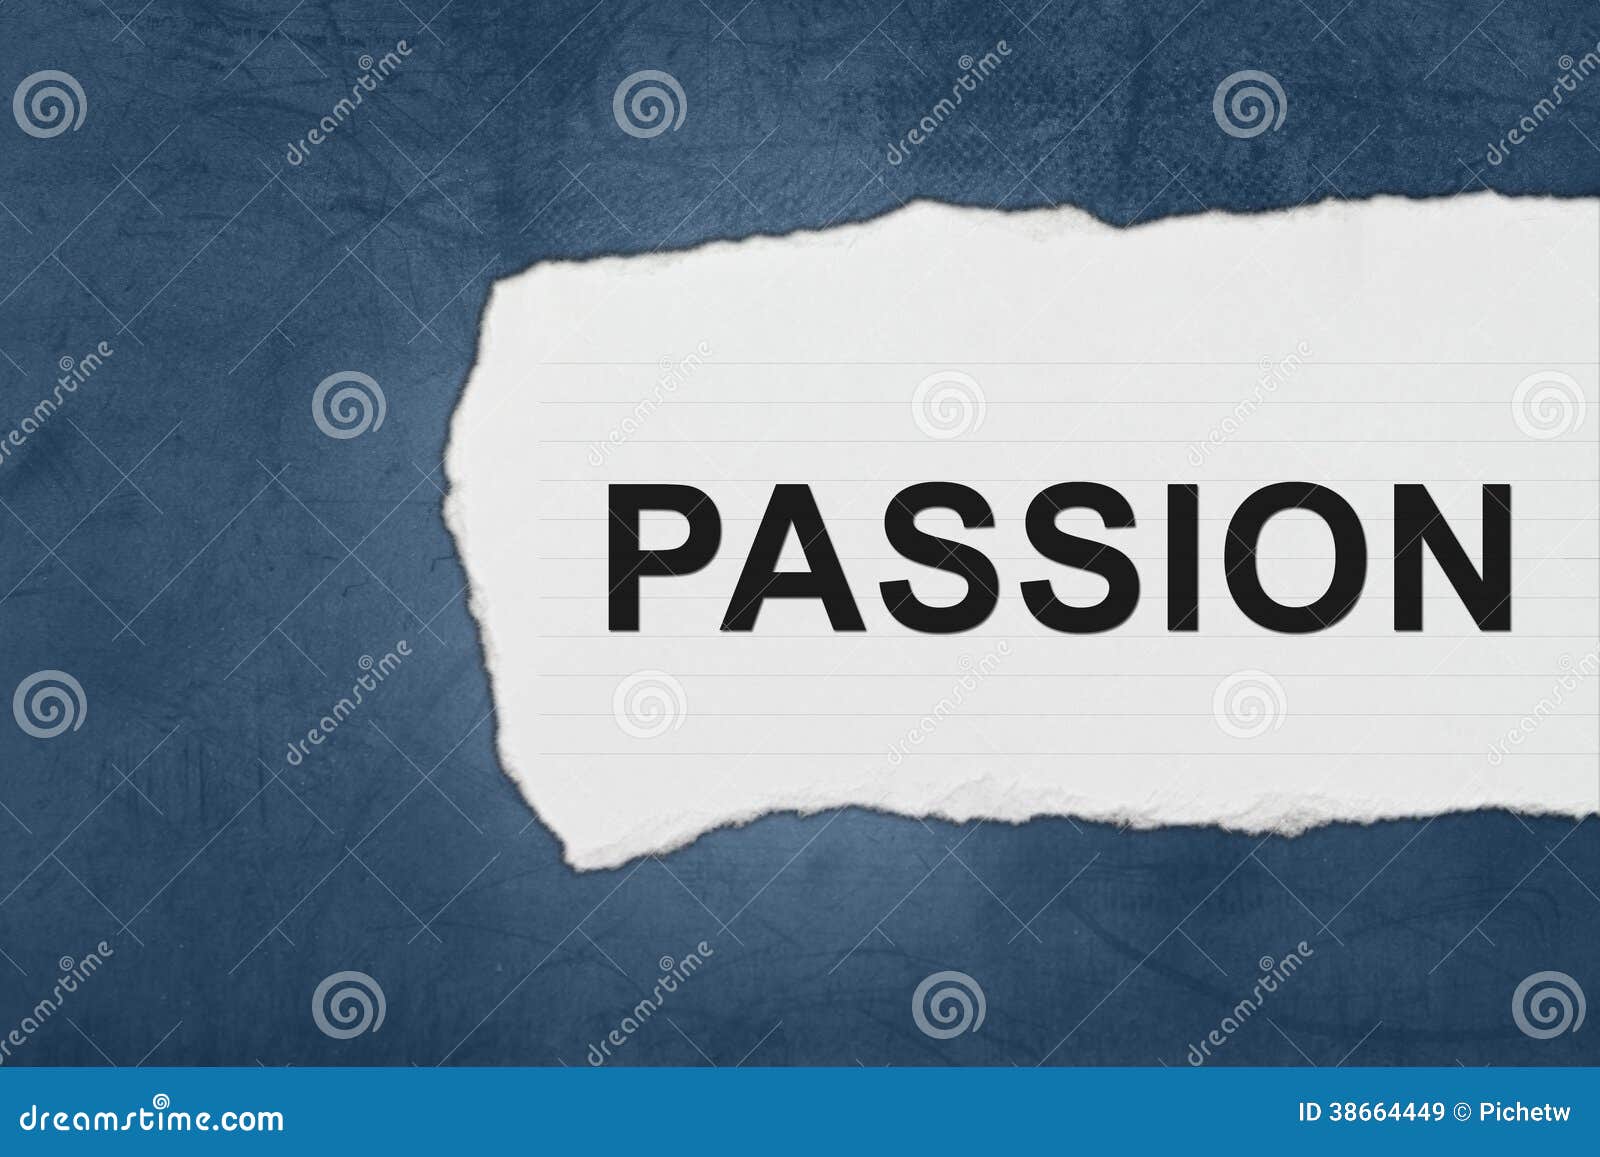 passion with white paper tears